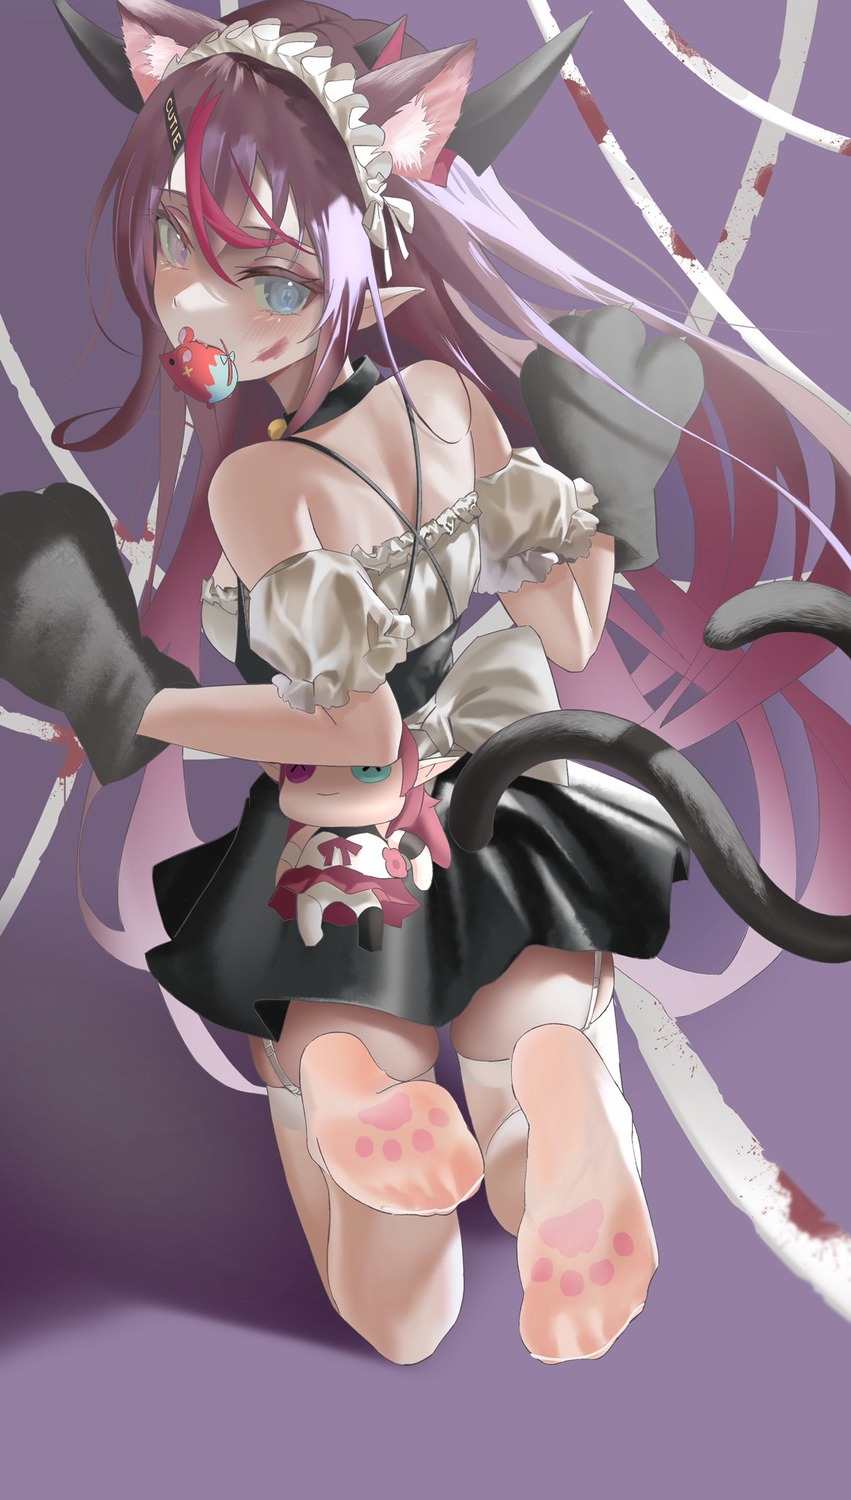 animal_ears chibi devil feet heterochromia hololive hololive_english horns irys_(hololive) maid nekomimi pointy_ears stockings tagme tail thighhighs wings